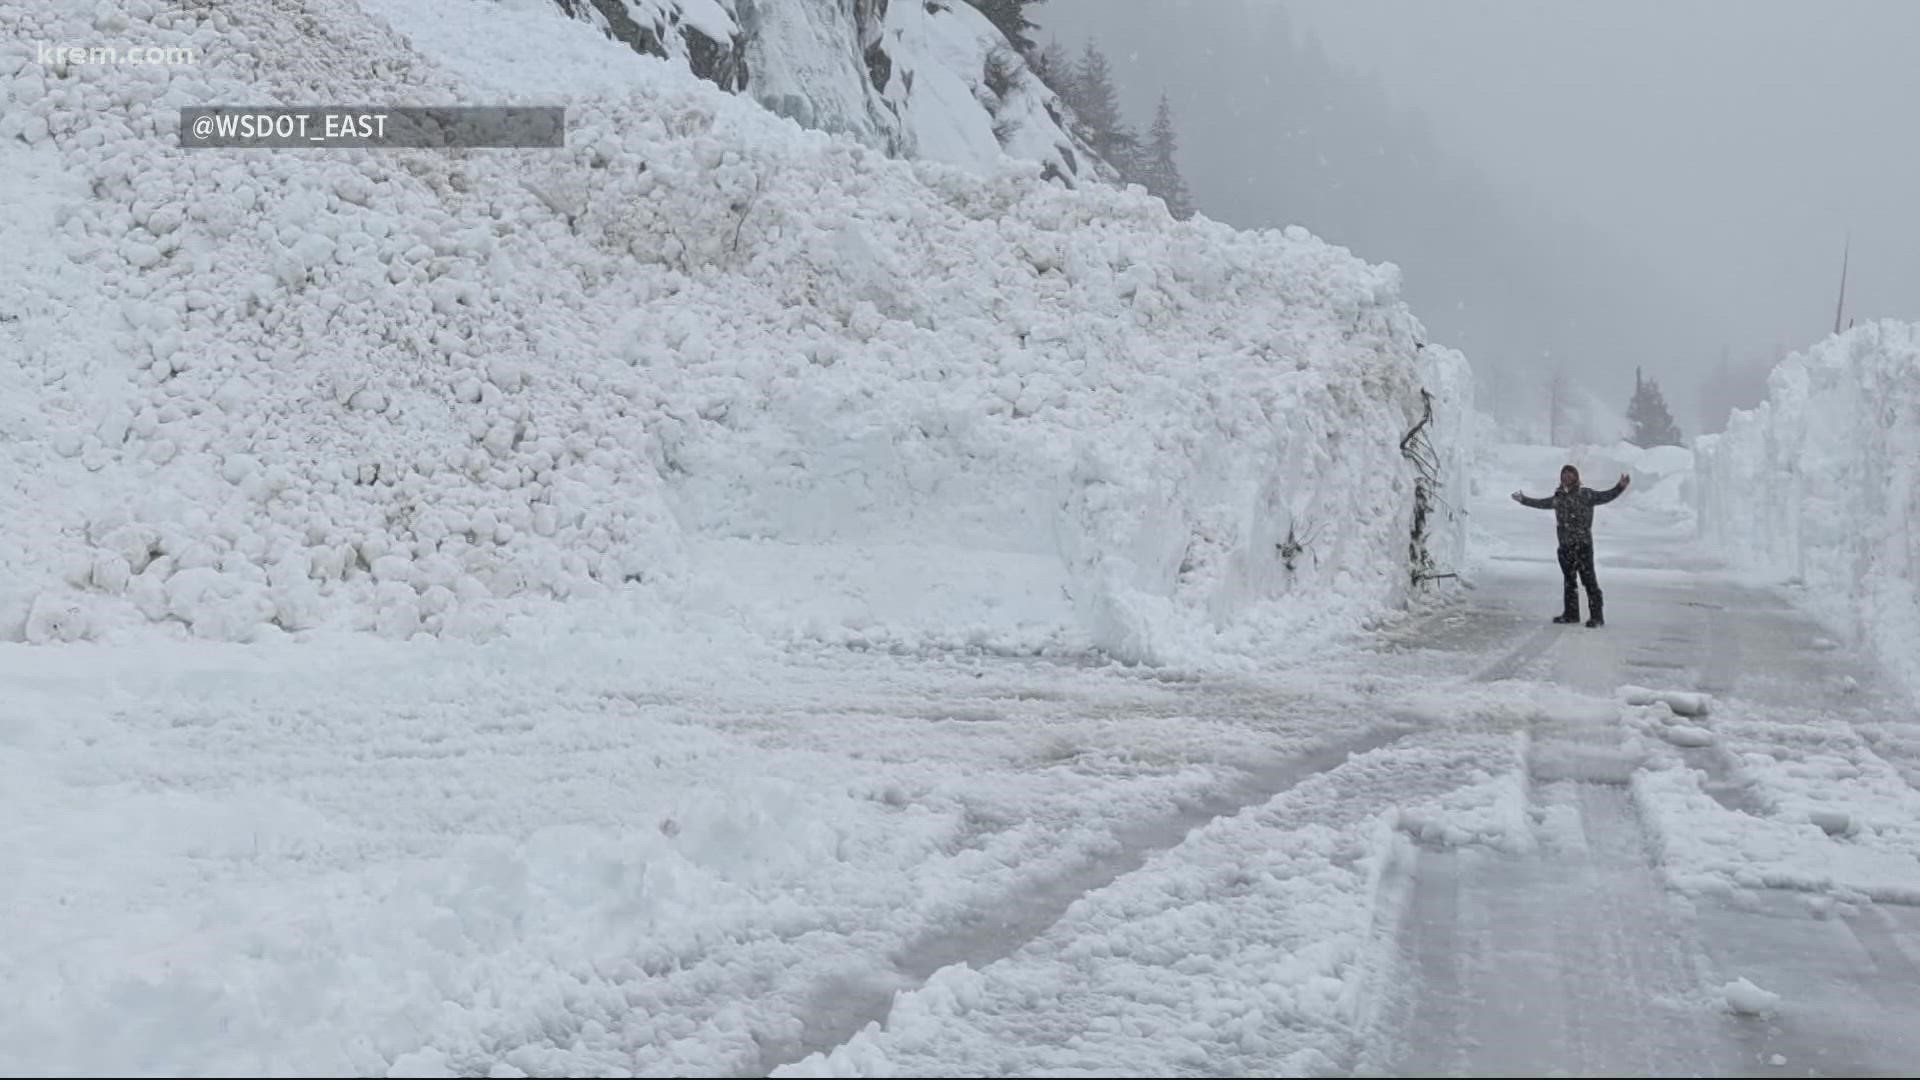 Snoqualmie Pass was closed for four days last week for the first time since 2008.